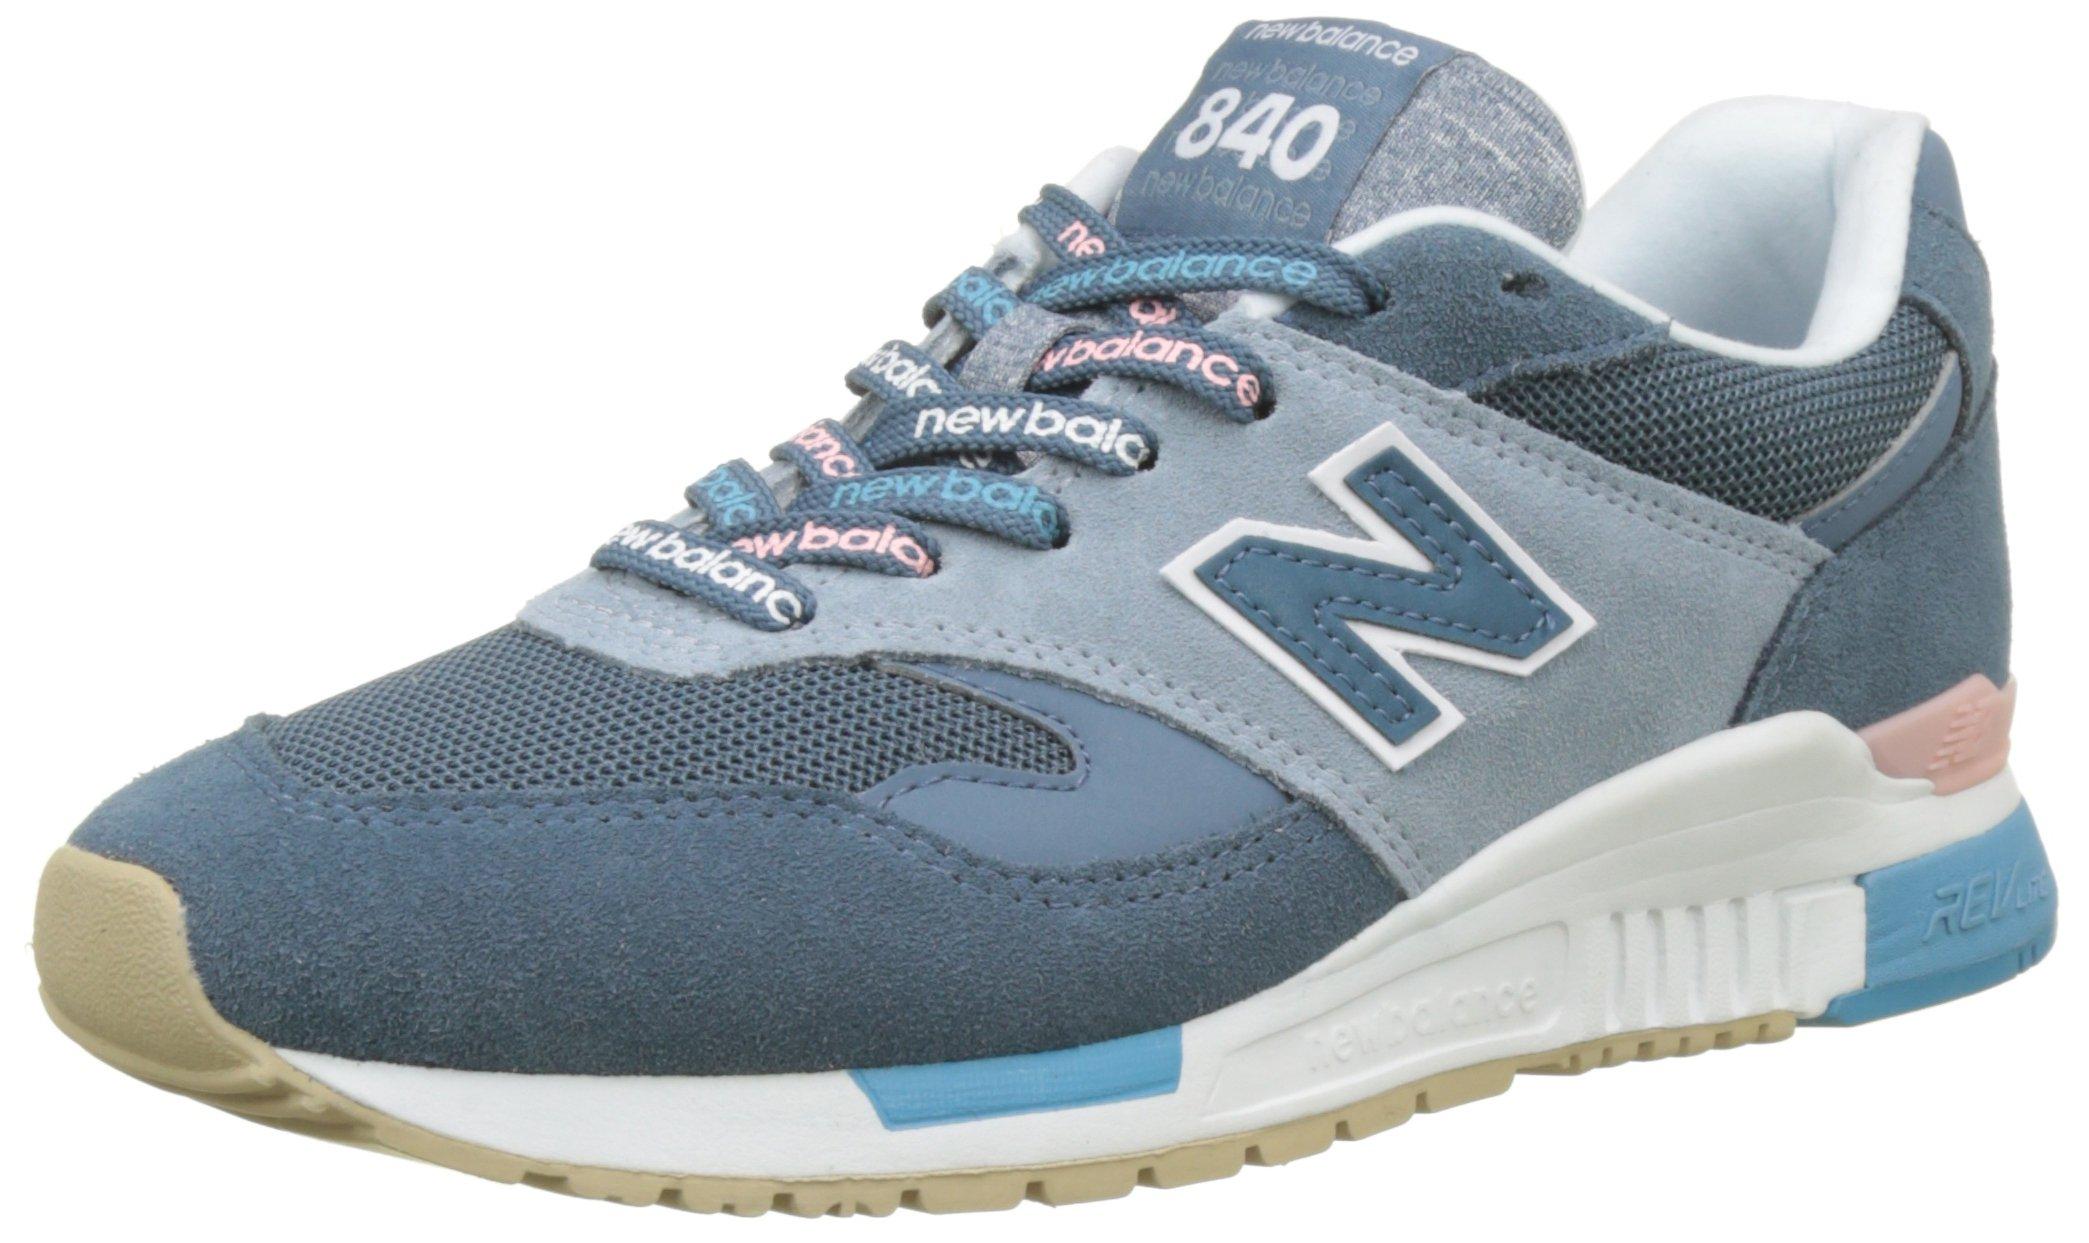 840, Mujer, Azul New Balance color Lyst